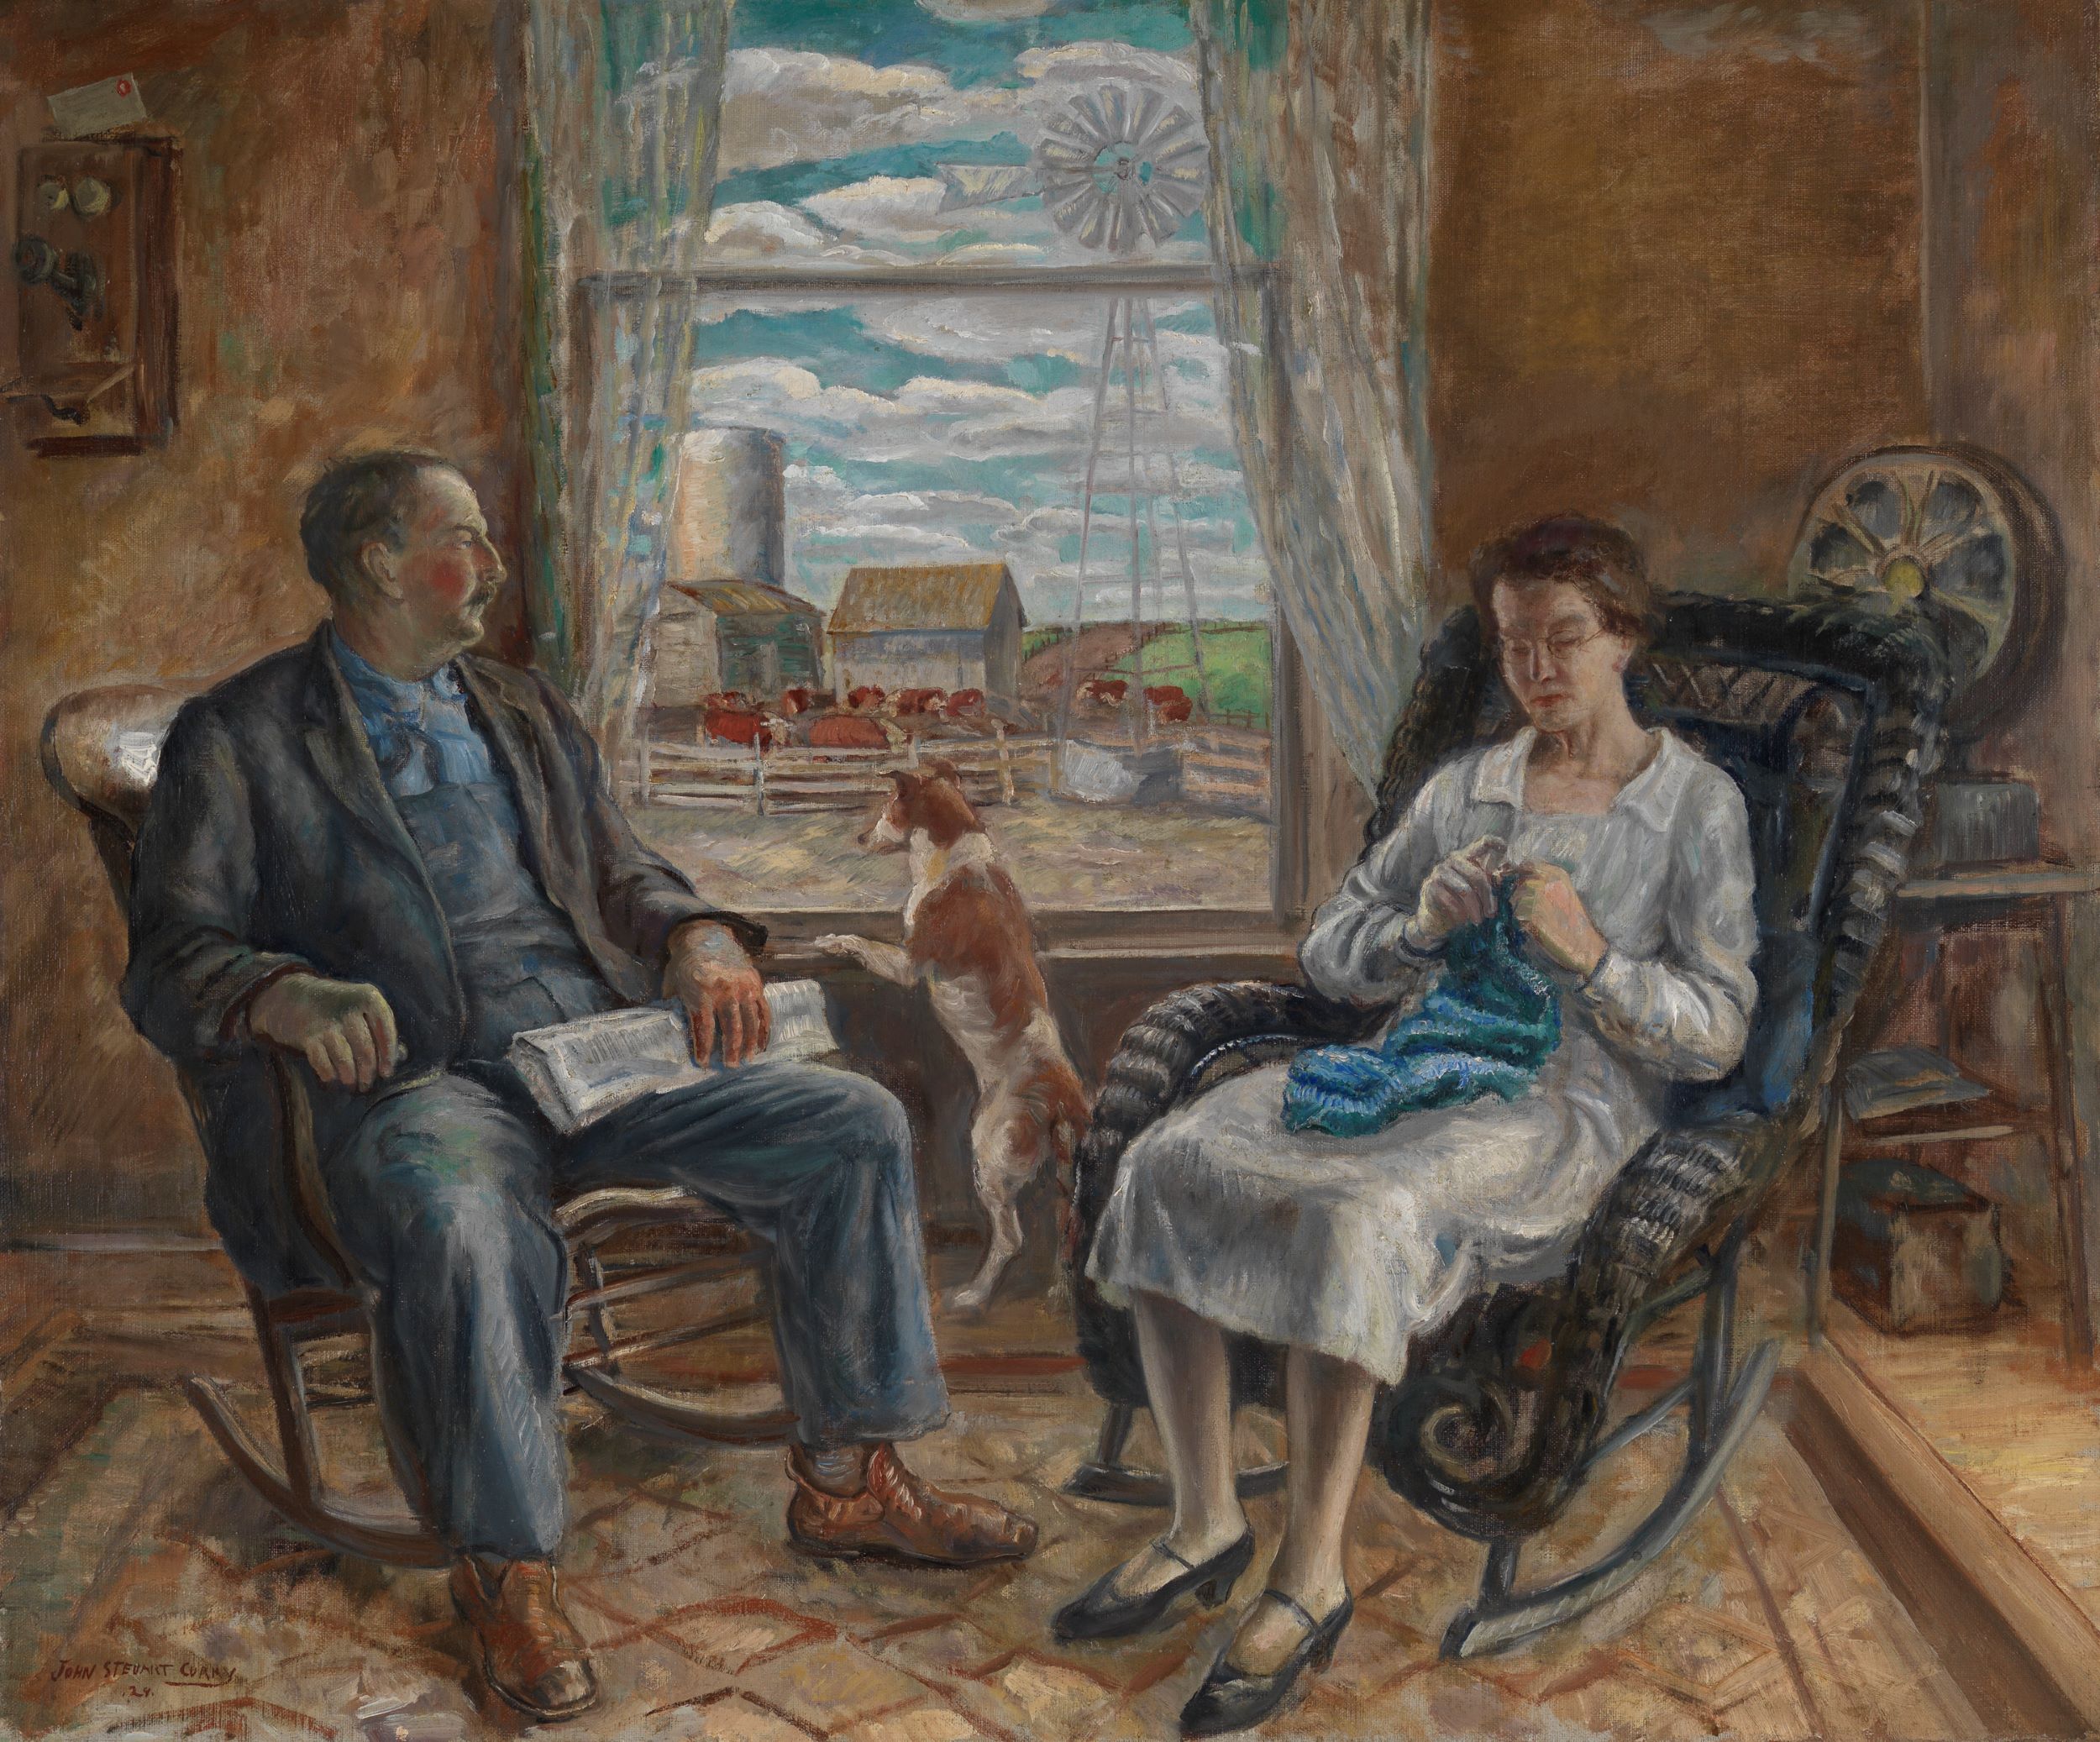 Oil painting showing a man, holding a newspaper, and woman, knitting, seated in two rocking chairs, with the window between them looking out onto a farmyard and windmill. A brown-and-white dog looks out the window, his front paws on the sill.